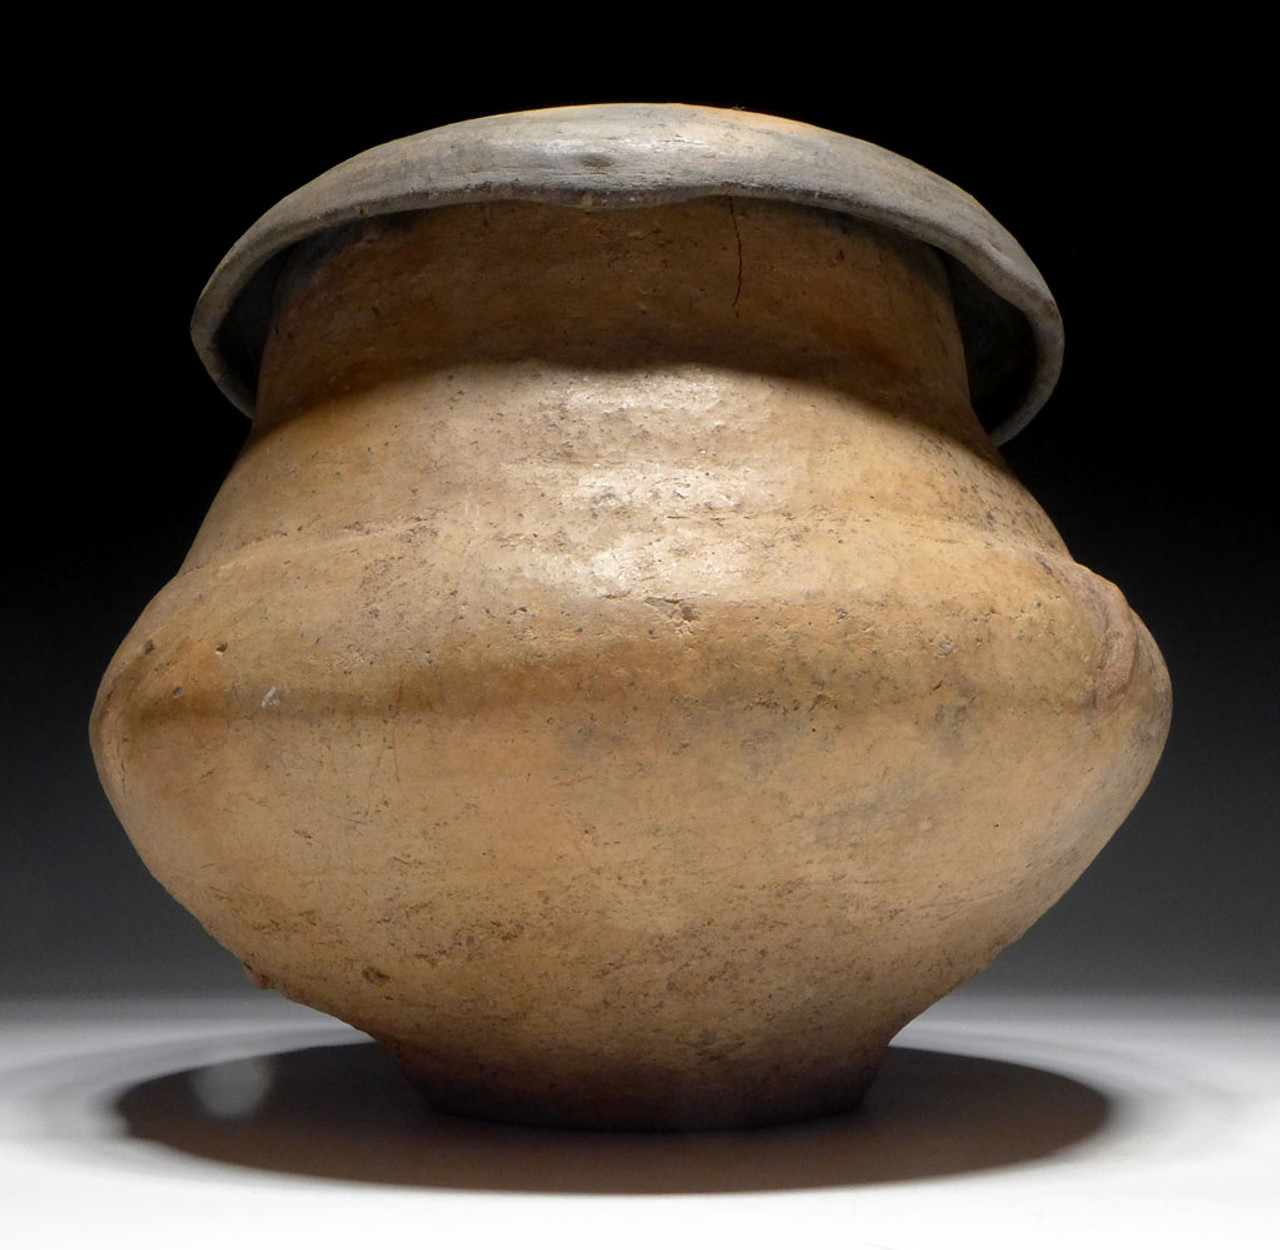 RARE AESTHETIC BRONZE AGE PRESTIGE CLASS CERAMIC URN WITH LID FROM THE URNFIELD LUSATIAN CULTURE  *UR47